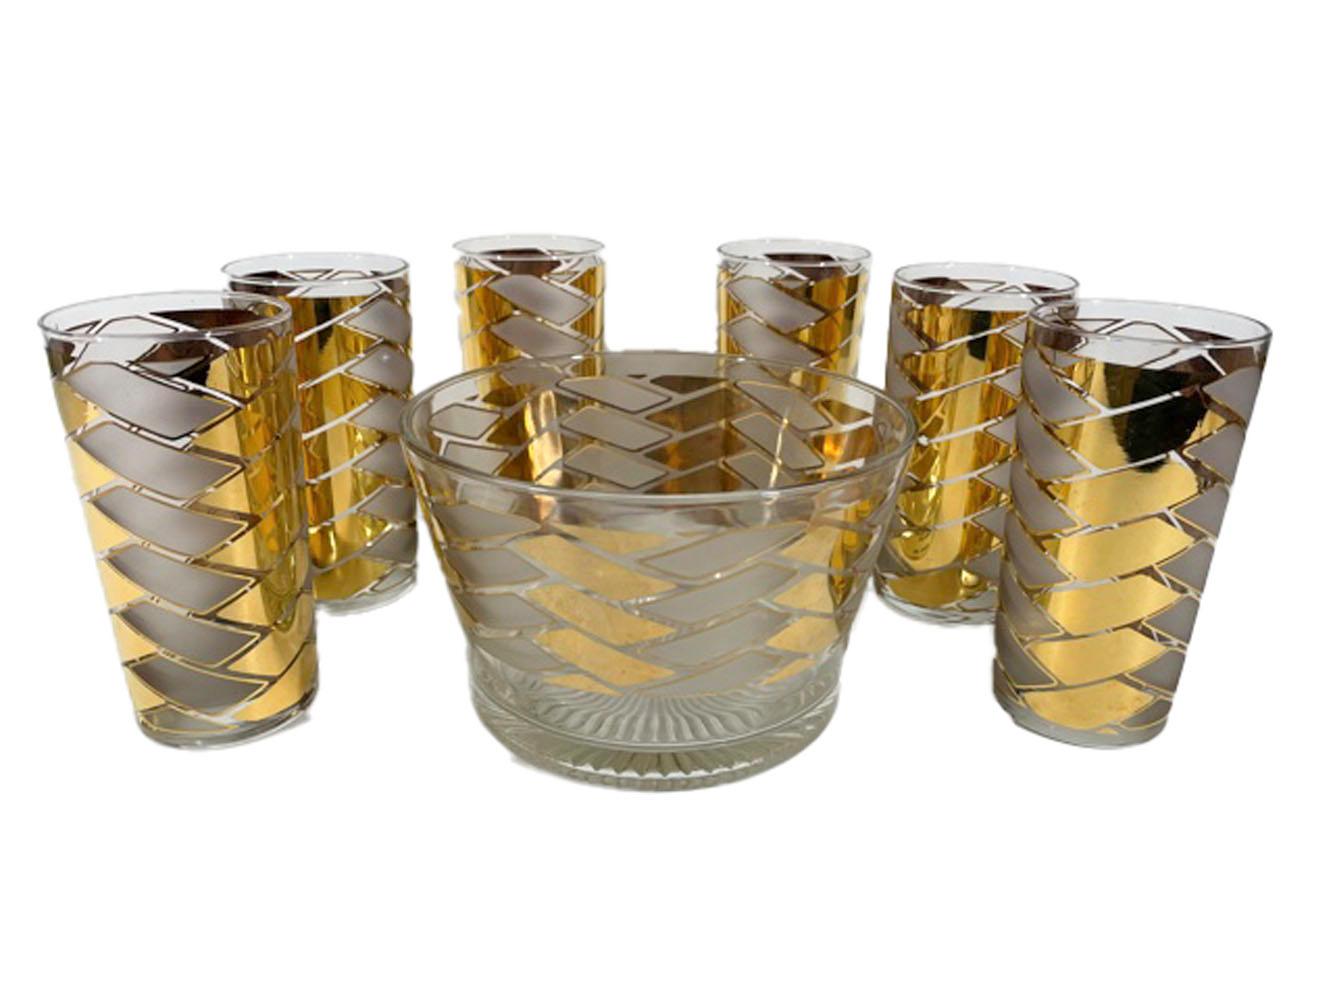 Vintage 7 Piece 22 Karat Gold & Frosted Herringbone Patterned Ice Bowl Set In Good Condition For Sale In Nantucket, MA